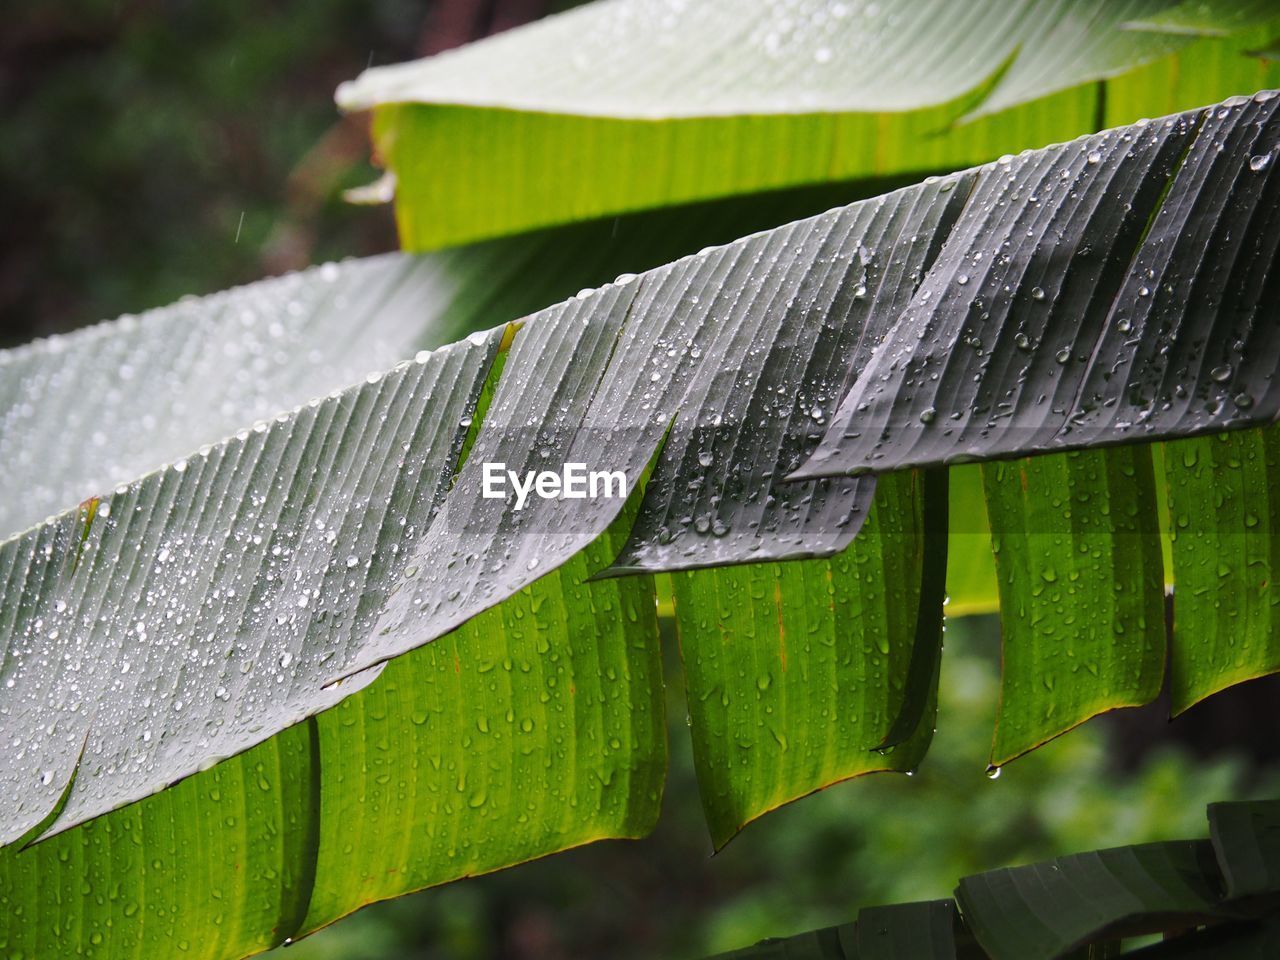 CLOSE-UP OF WET LEAVES ON RAINY DAY